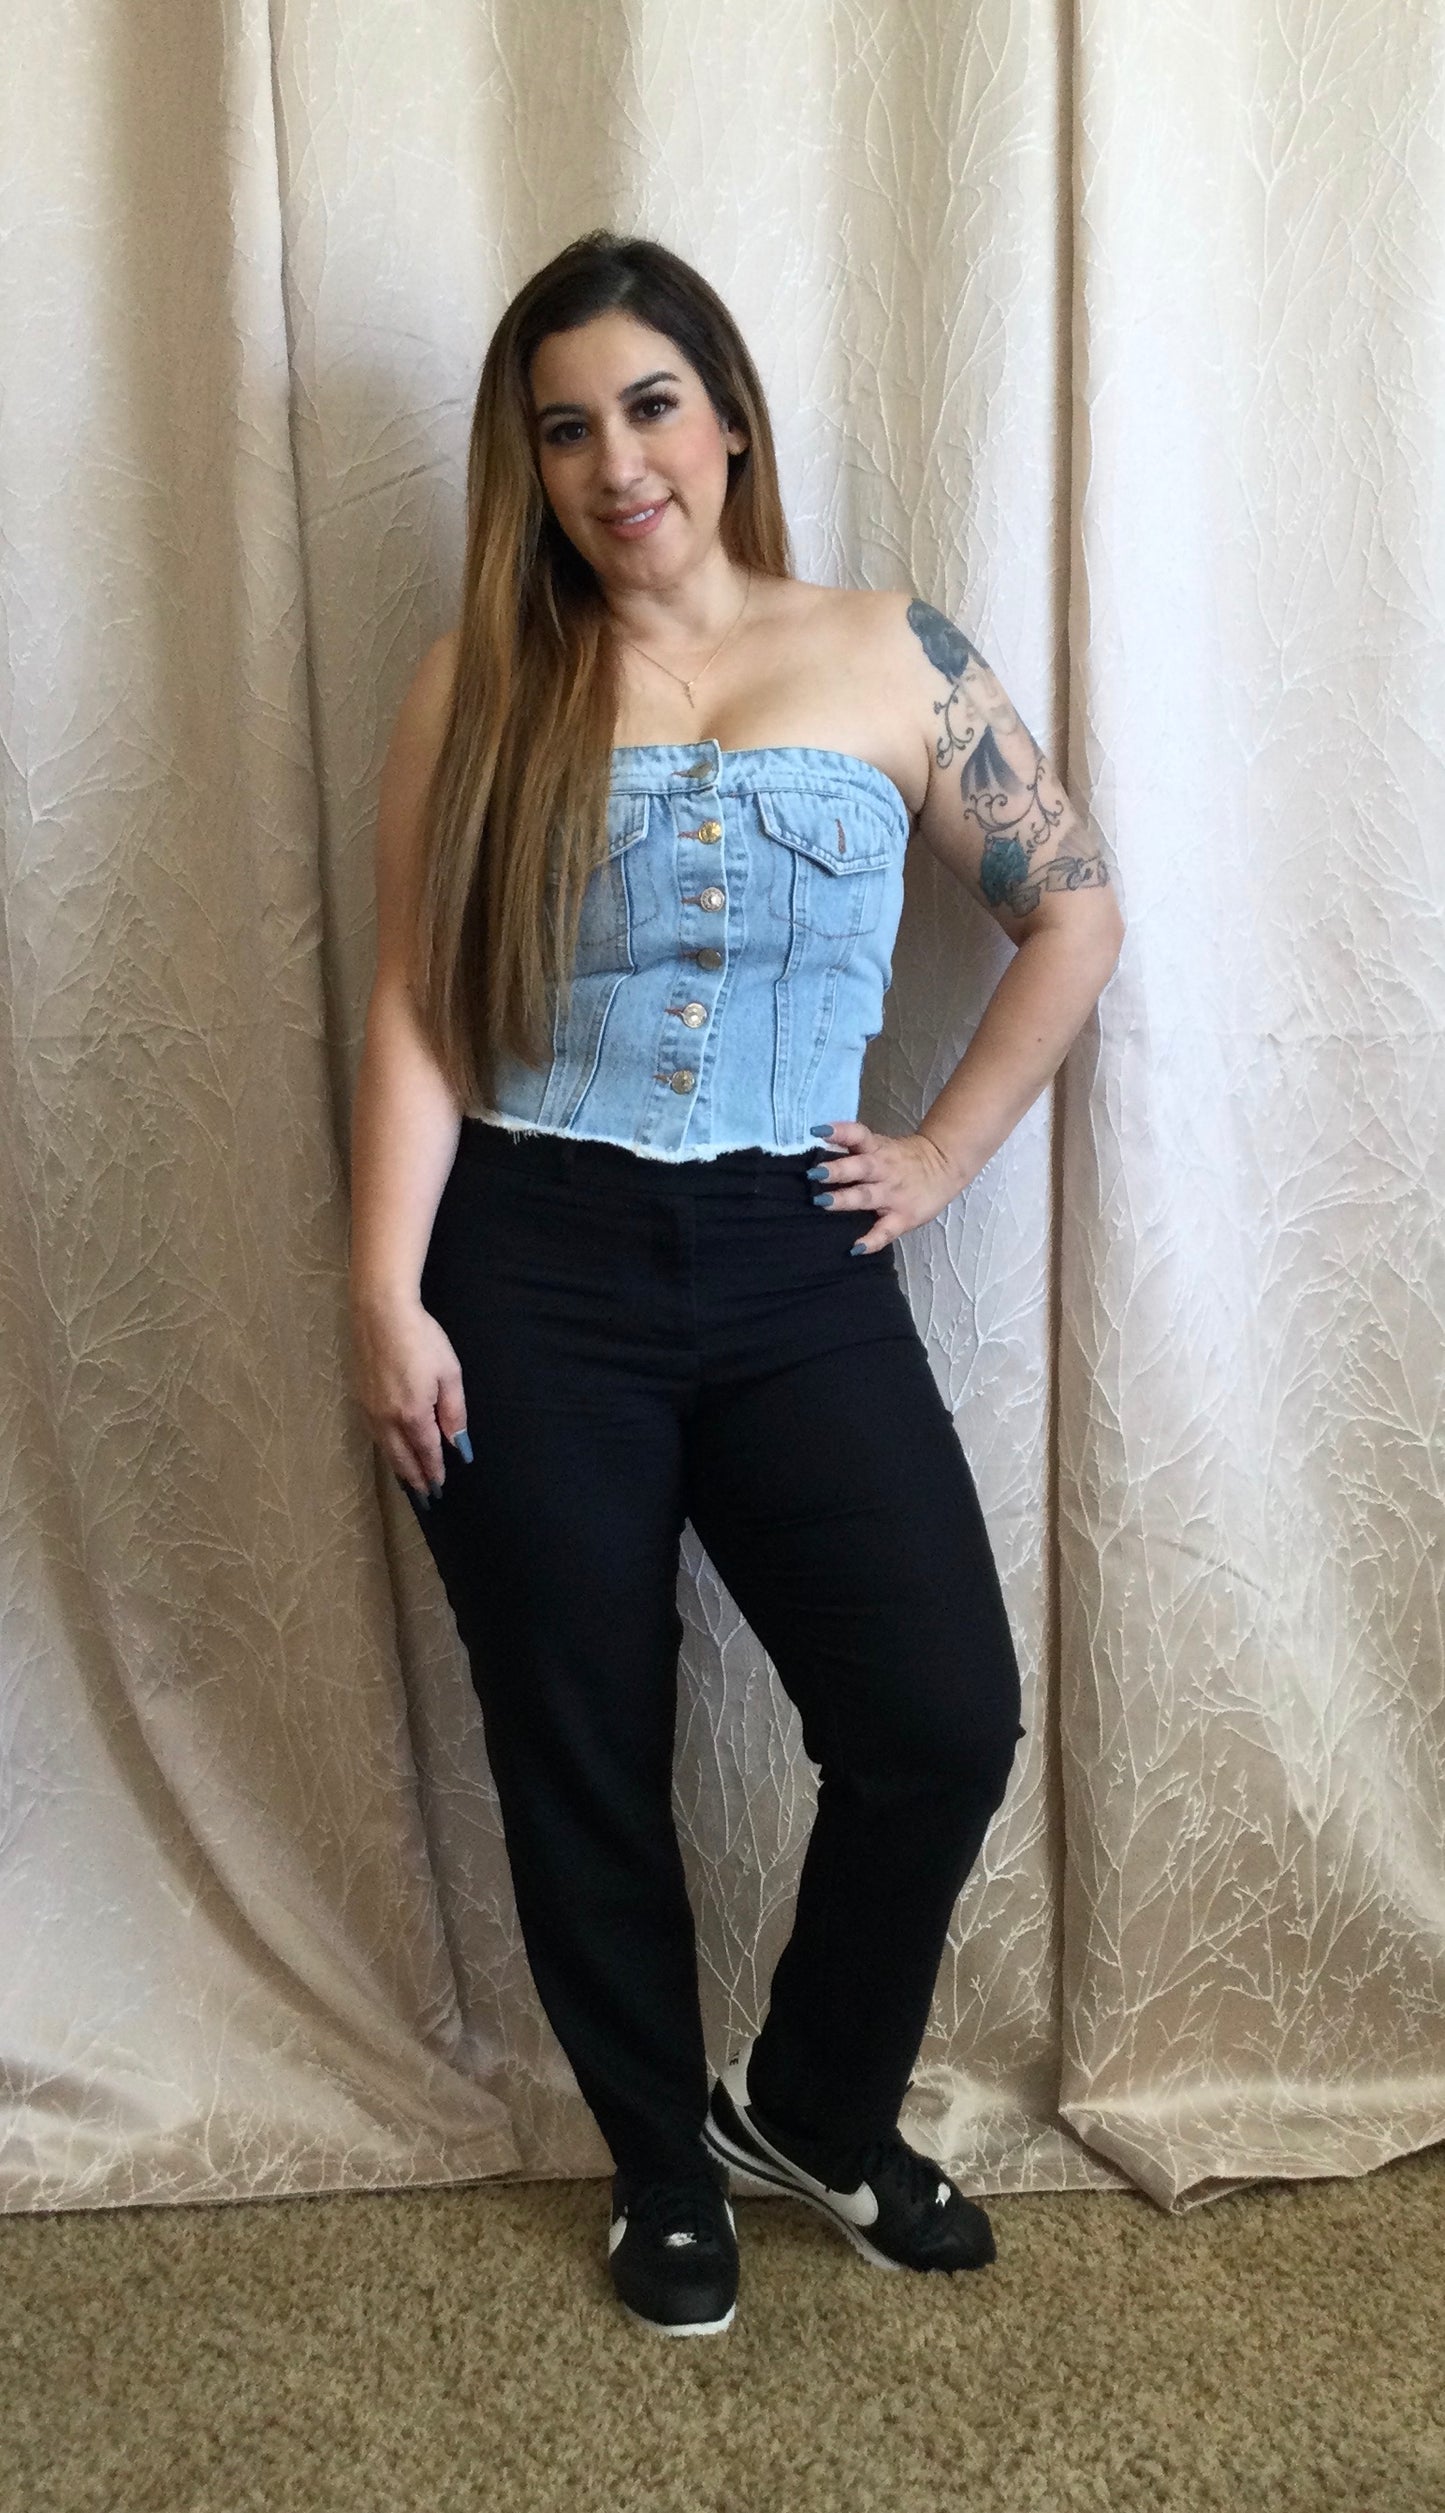 Over washed denim corset tube top with button down detail